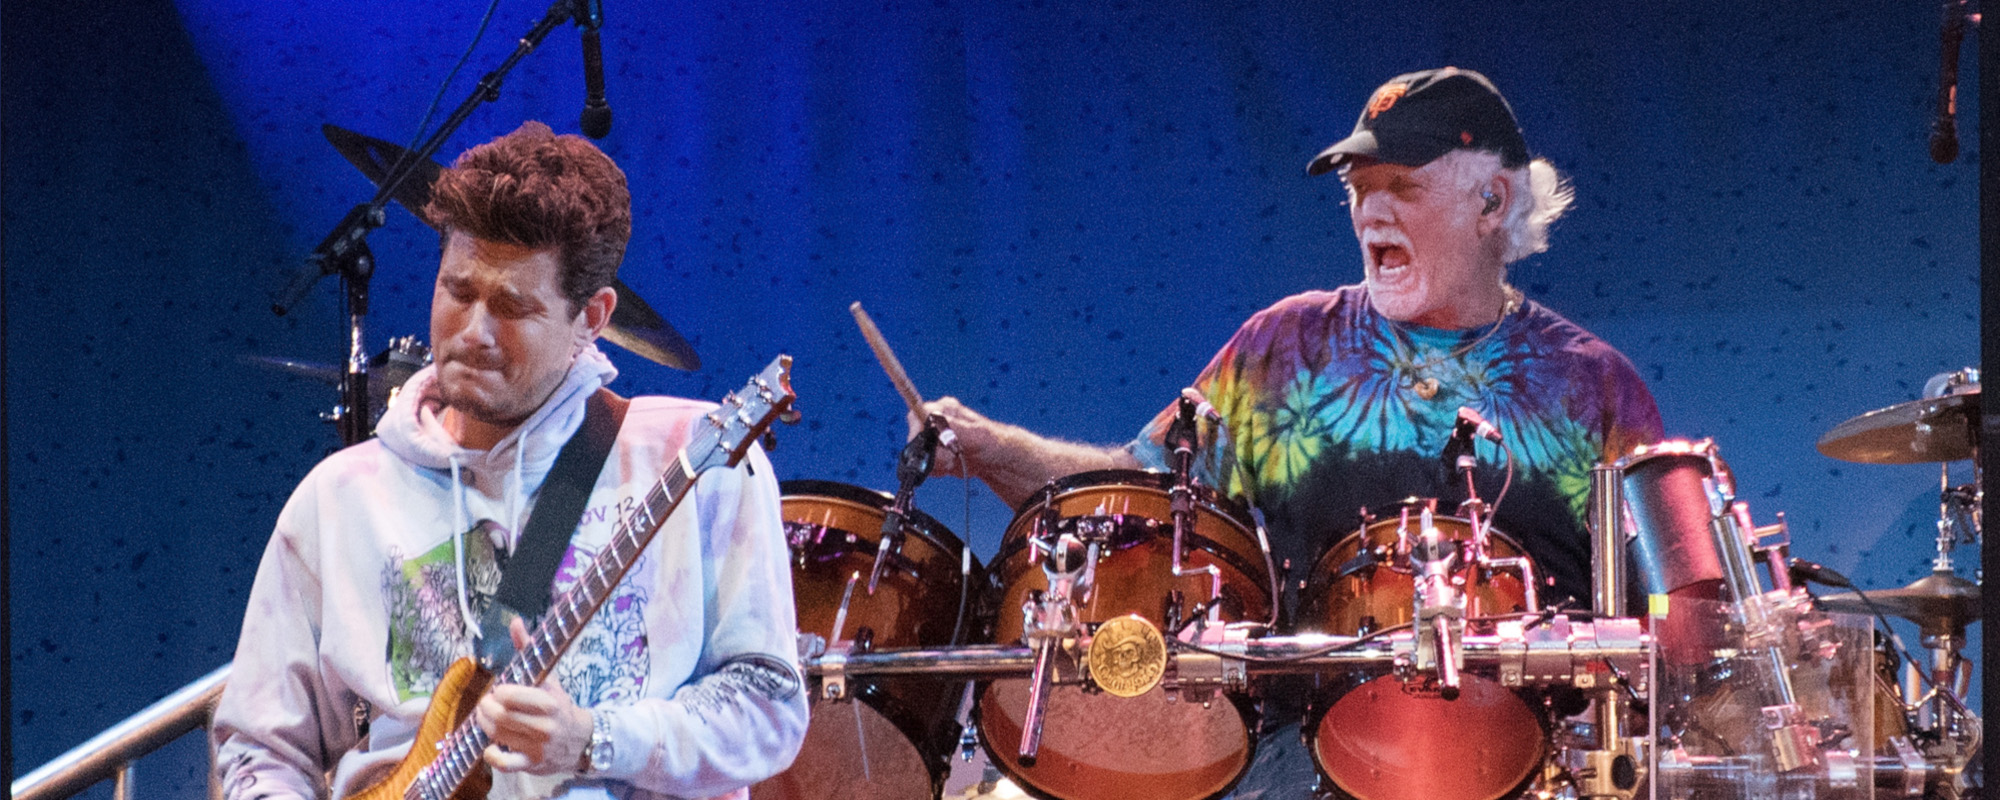 Dead & Company Will Play One Final Tour